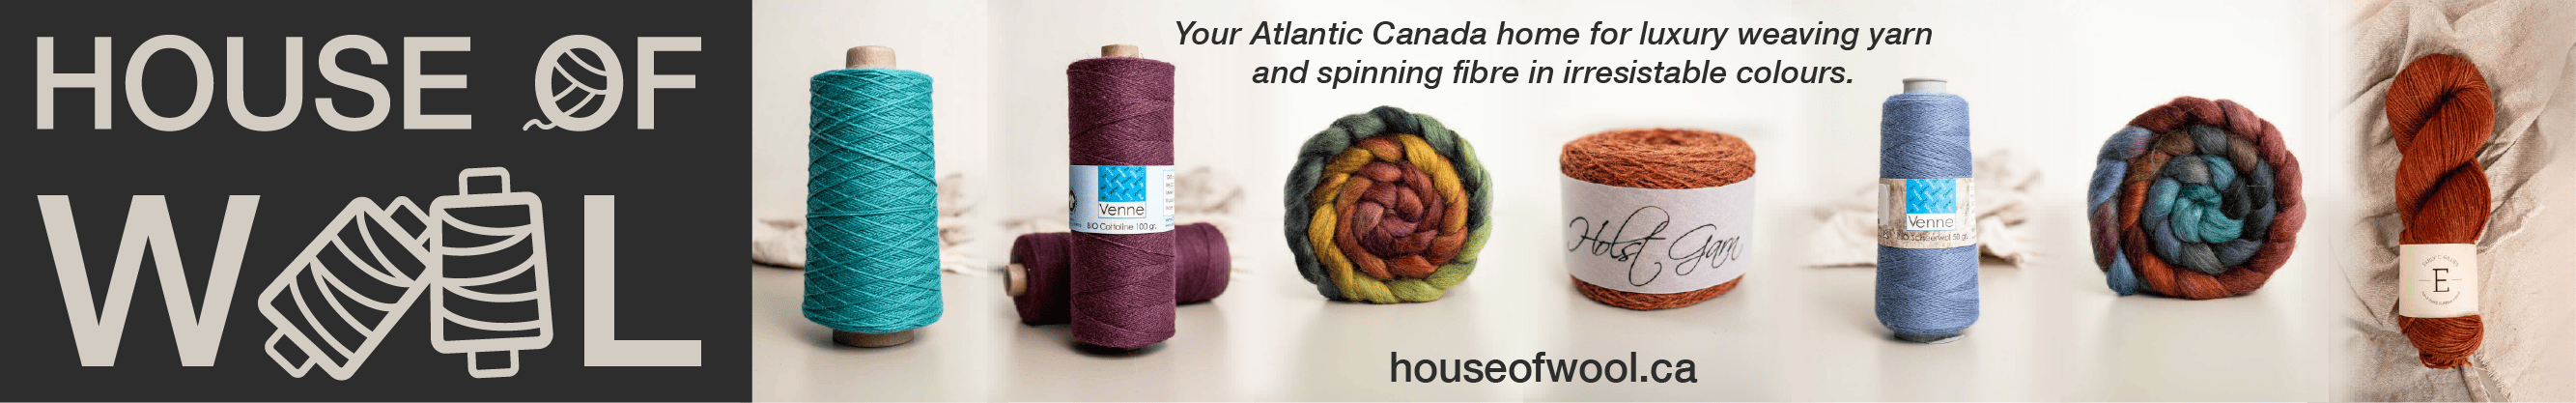 Ad for House of Wool, featuring photos of a variety of yarns and spinning fibre.